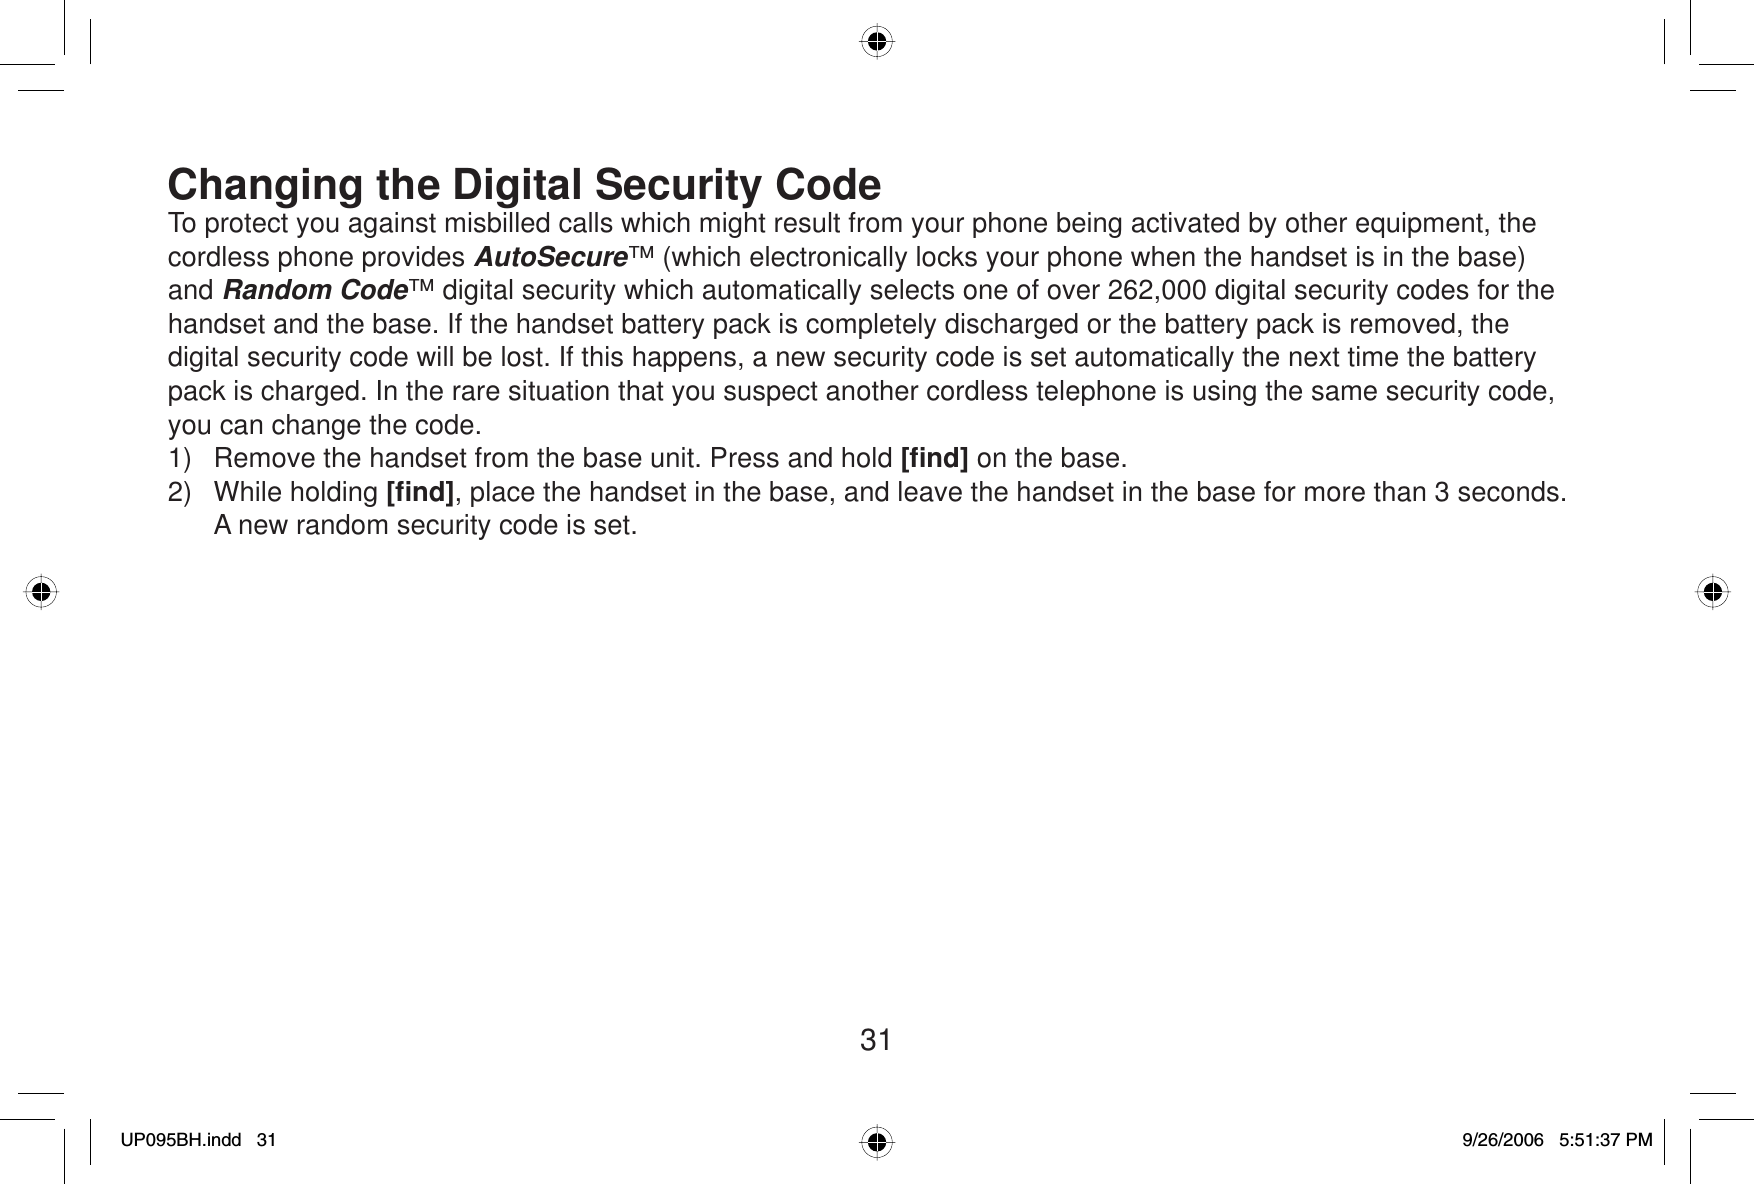 31Changing the Digital Security CodeTo protect you against misbilled calls which might result from your phone being activated by other equipment, the cordless phone provides AutoSecure™ (which electronically locks your phone when the handset is in the base) and Random Code™ digital security which automatically selects one of over 262,000 digital security codes for the handset and the base. If the handset battery pack is completely discharged or the battery pack is removed, the digital security code will be lost. If this happens, a new security code is set automatically the next time the battery pack is charged. In the rare situation that you suspect another cordless telephone is using the same security code, you can change the code.1)  Remove the handset from the base unit. Press and hold [ﬁ nd] on the base.2) While holding [ﬁ nd], place the handset in the base, and leave the handset in the base for more than 3 seconds. A new random security code is set.UP095BH.indd 31UP095BH.indd   319/26/2006 5:51:37 PM9/26/2006   5:51:37 PM